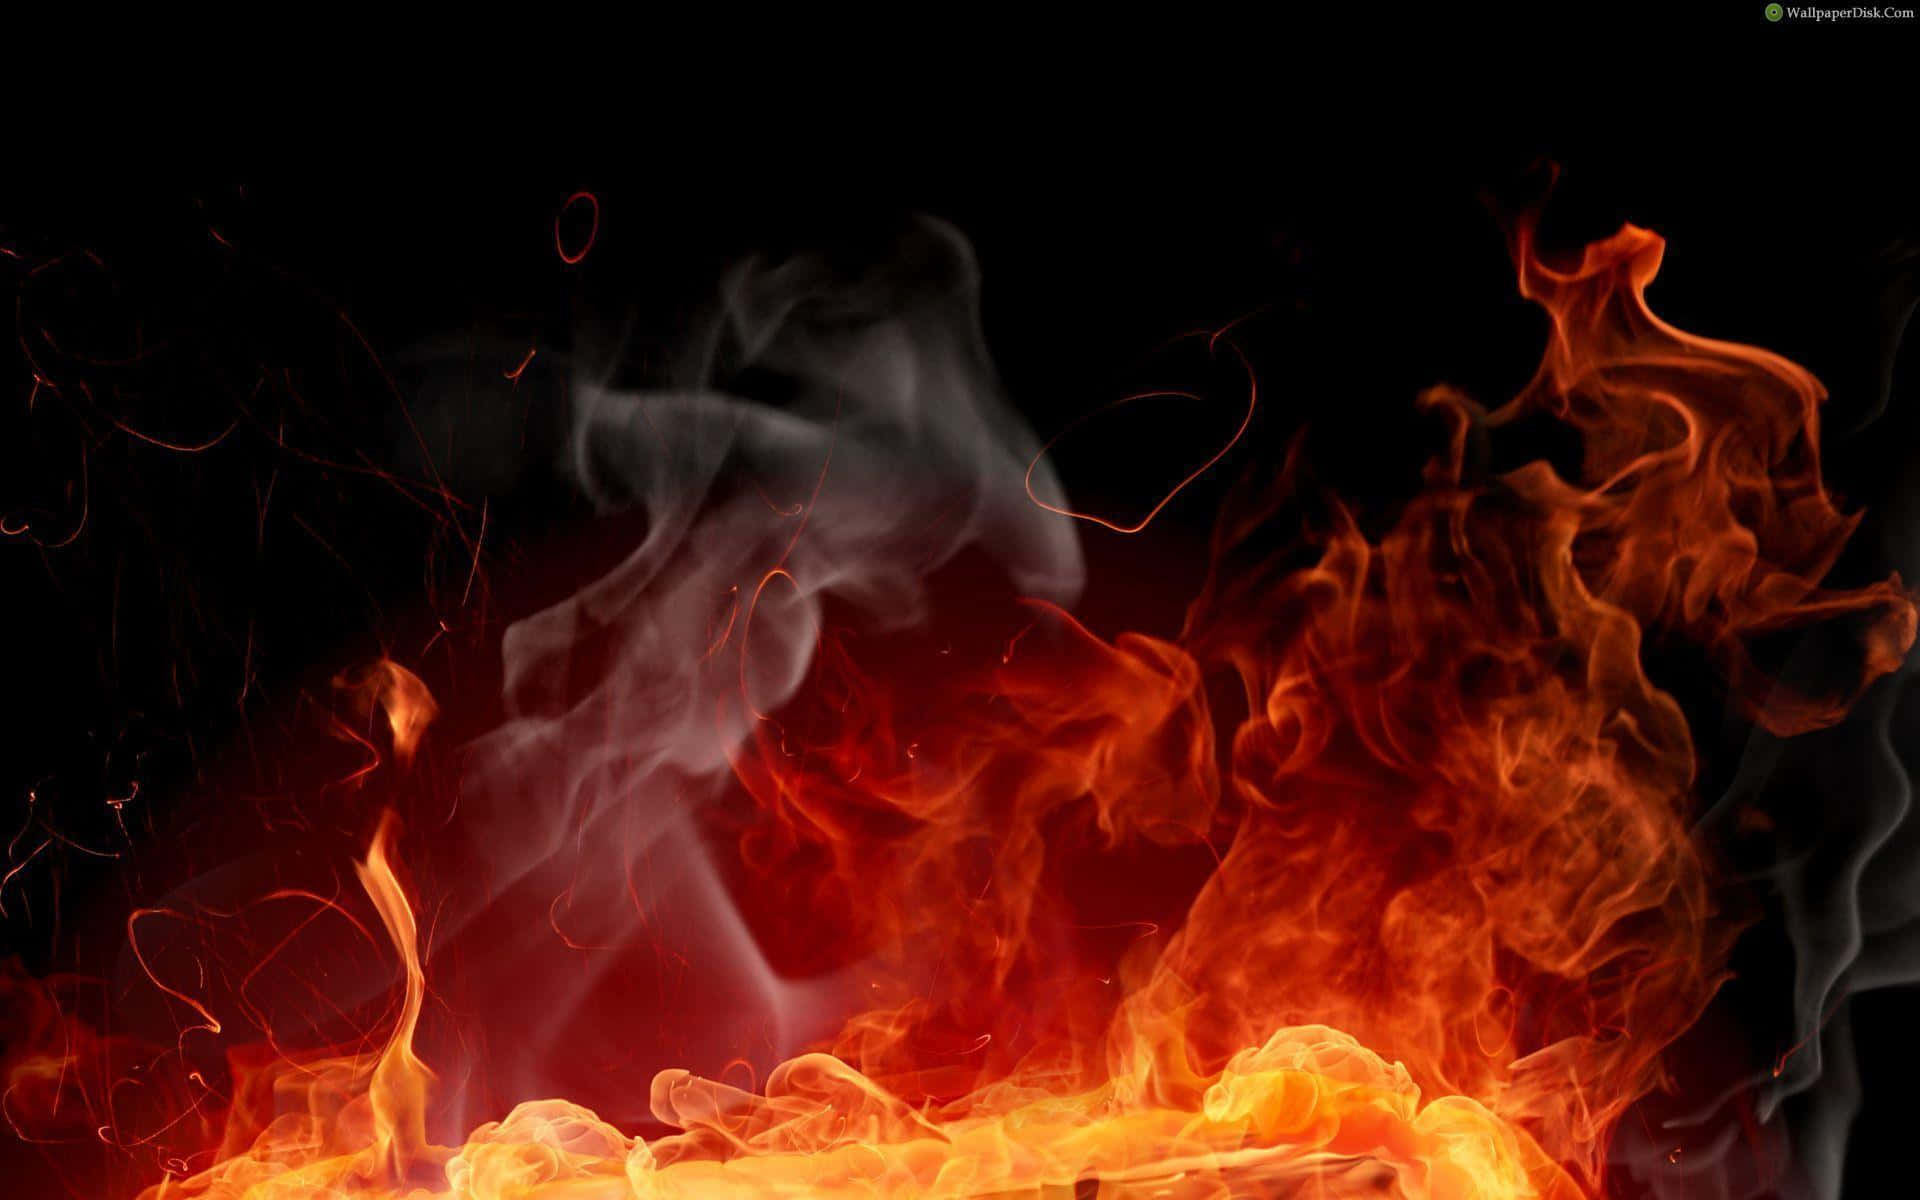 Intense 3D Fire Igniting in the Darkness Wallpaper